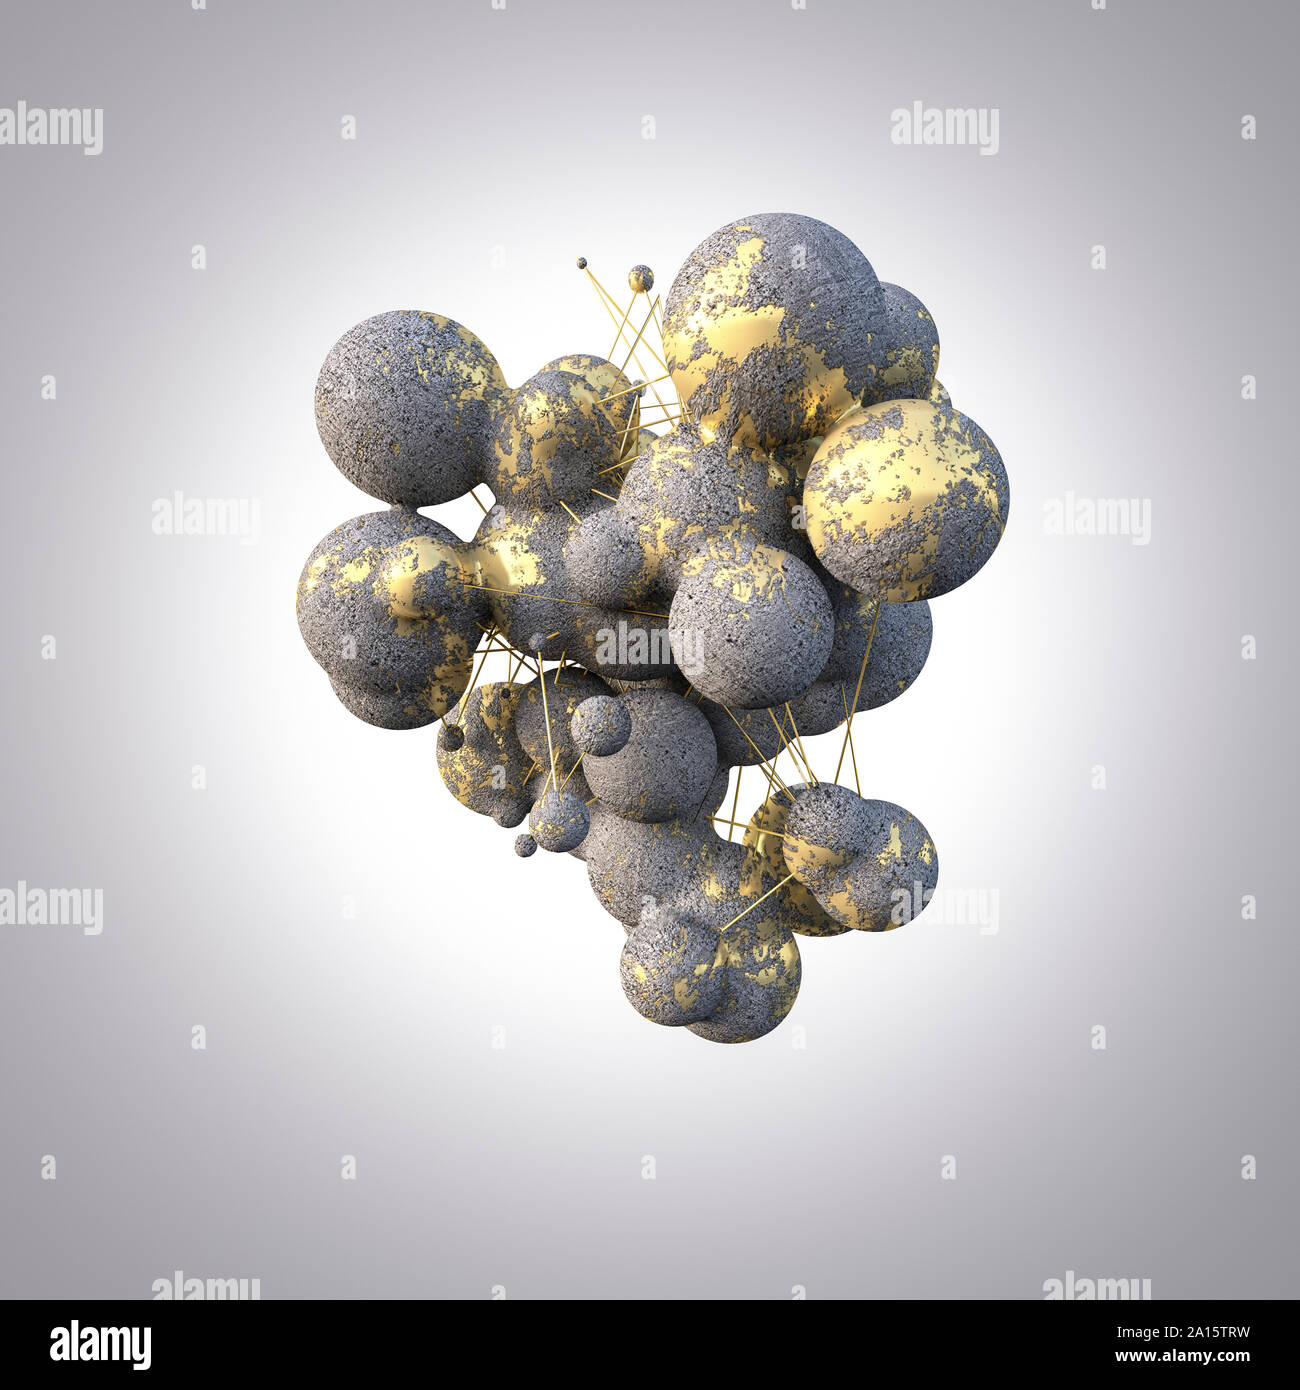 Rendering of concrete spheres with gold veins Stock Photo